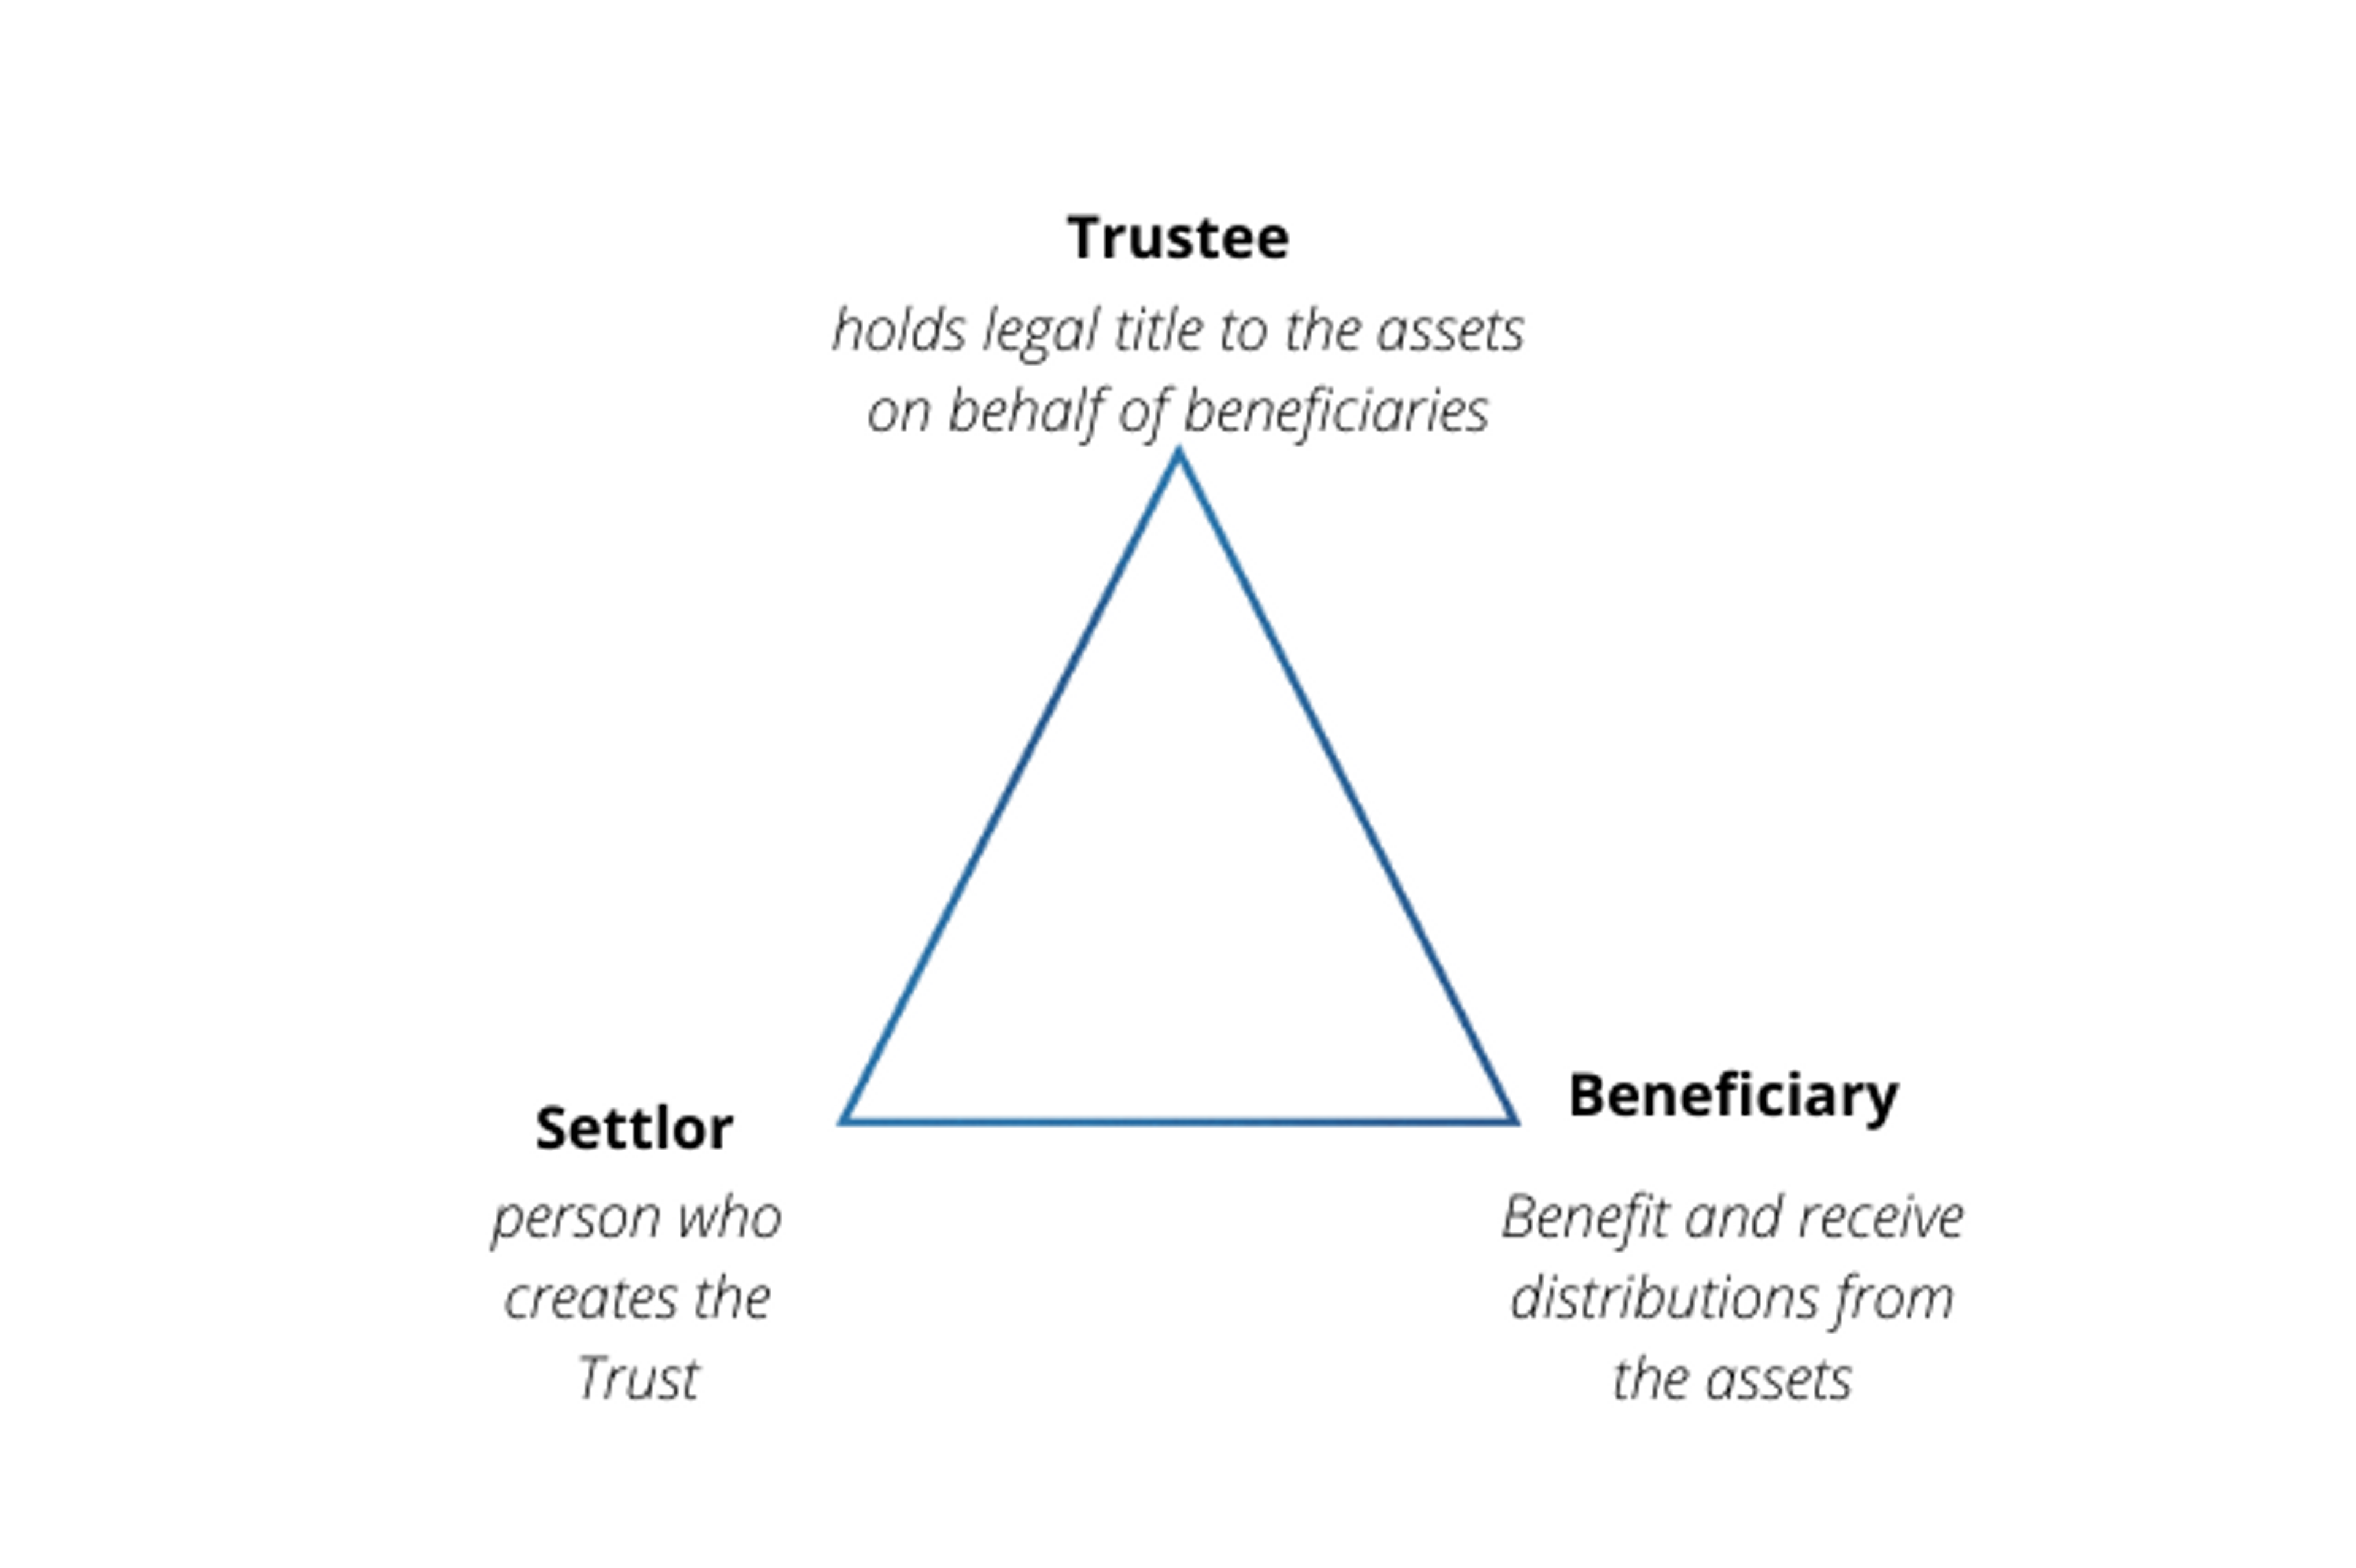 Diagram of the key players in a revocable living trust. The Settlor is the person who creates the trust. The Trustee holds legal title to the assets on behalf of the beneficiaries. The beneficiaries benefit and receive distributions from the assets